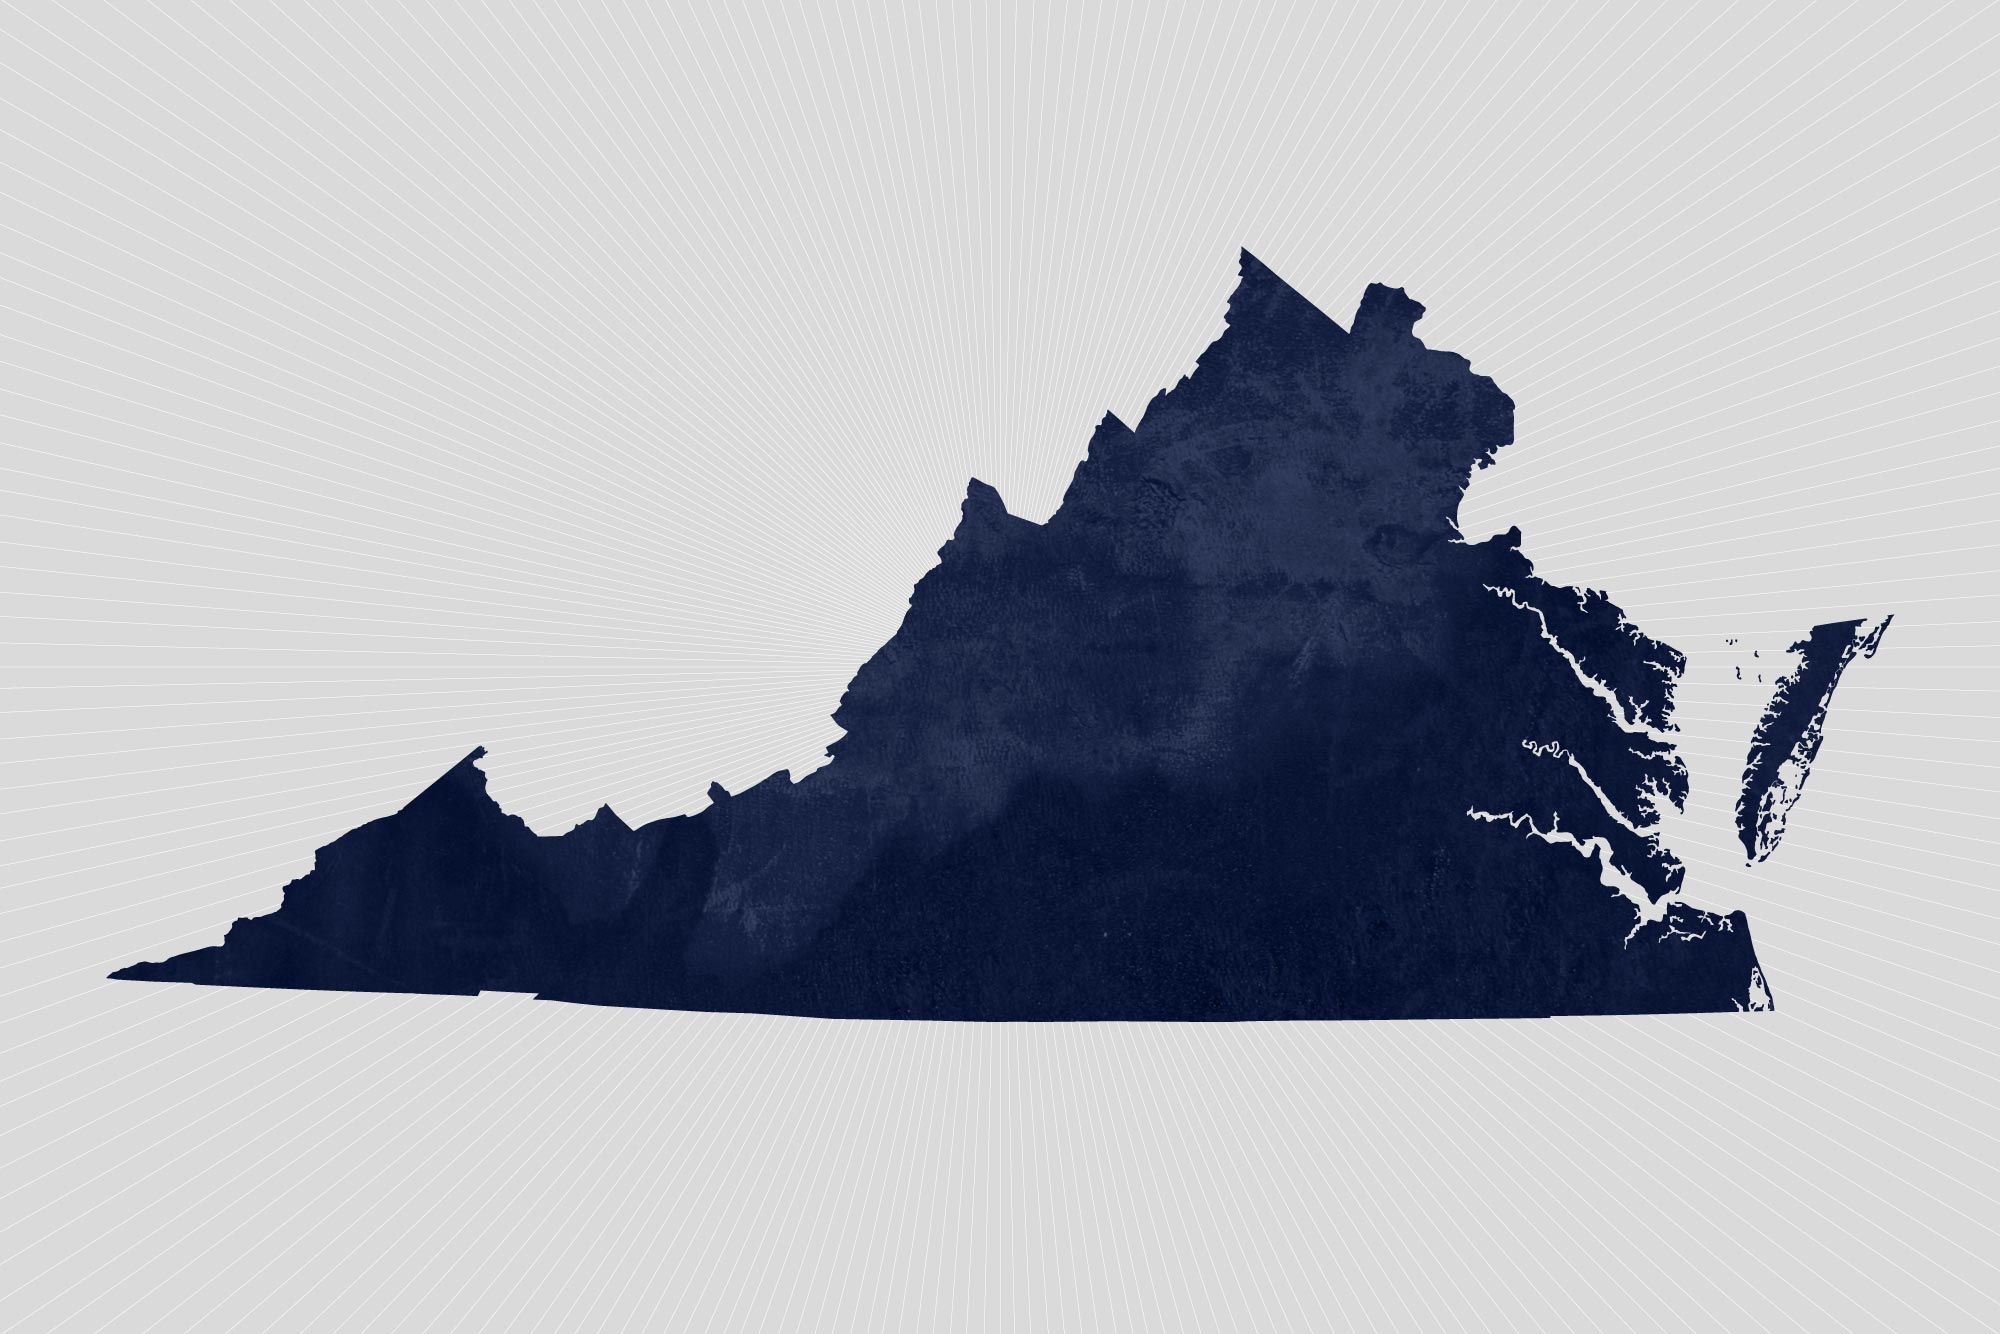 State of Virginia in a dark blue color